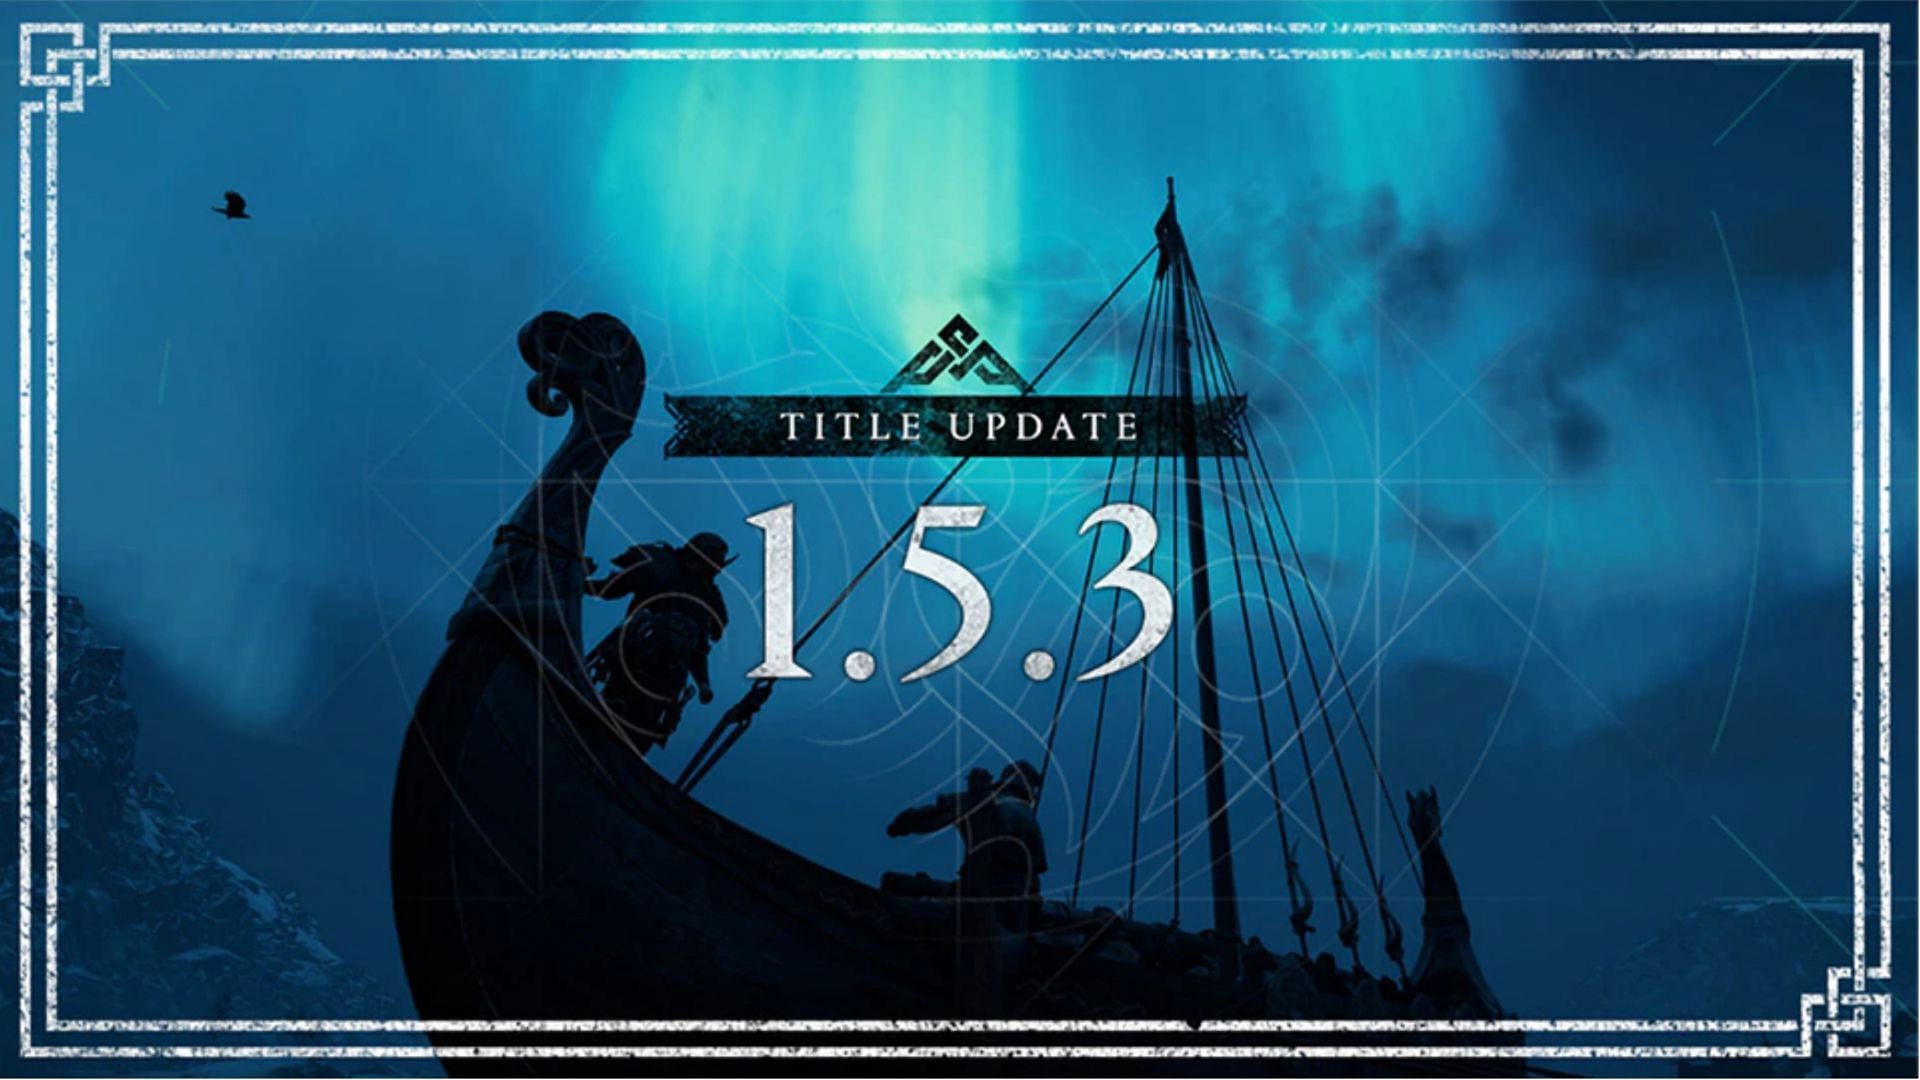 Assassin&rsquo;s Creed Valhalla Title Update 1.5.3 (Image by Ubisoft)